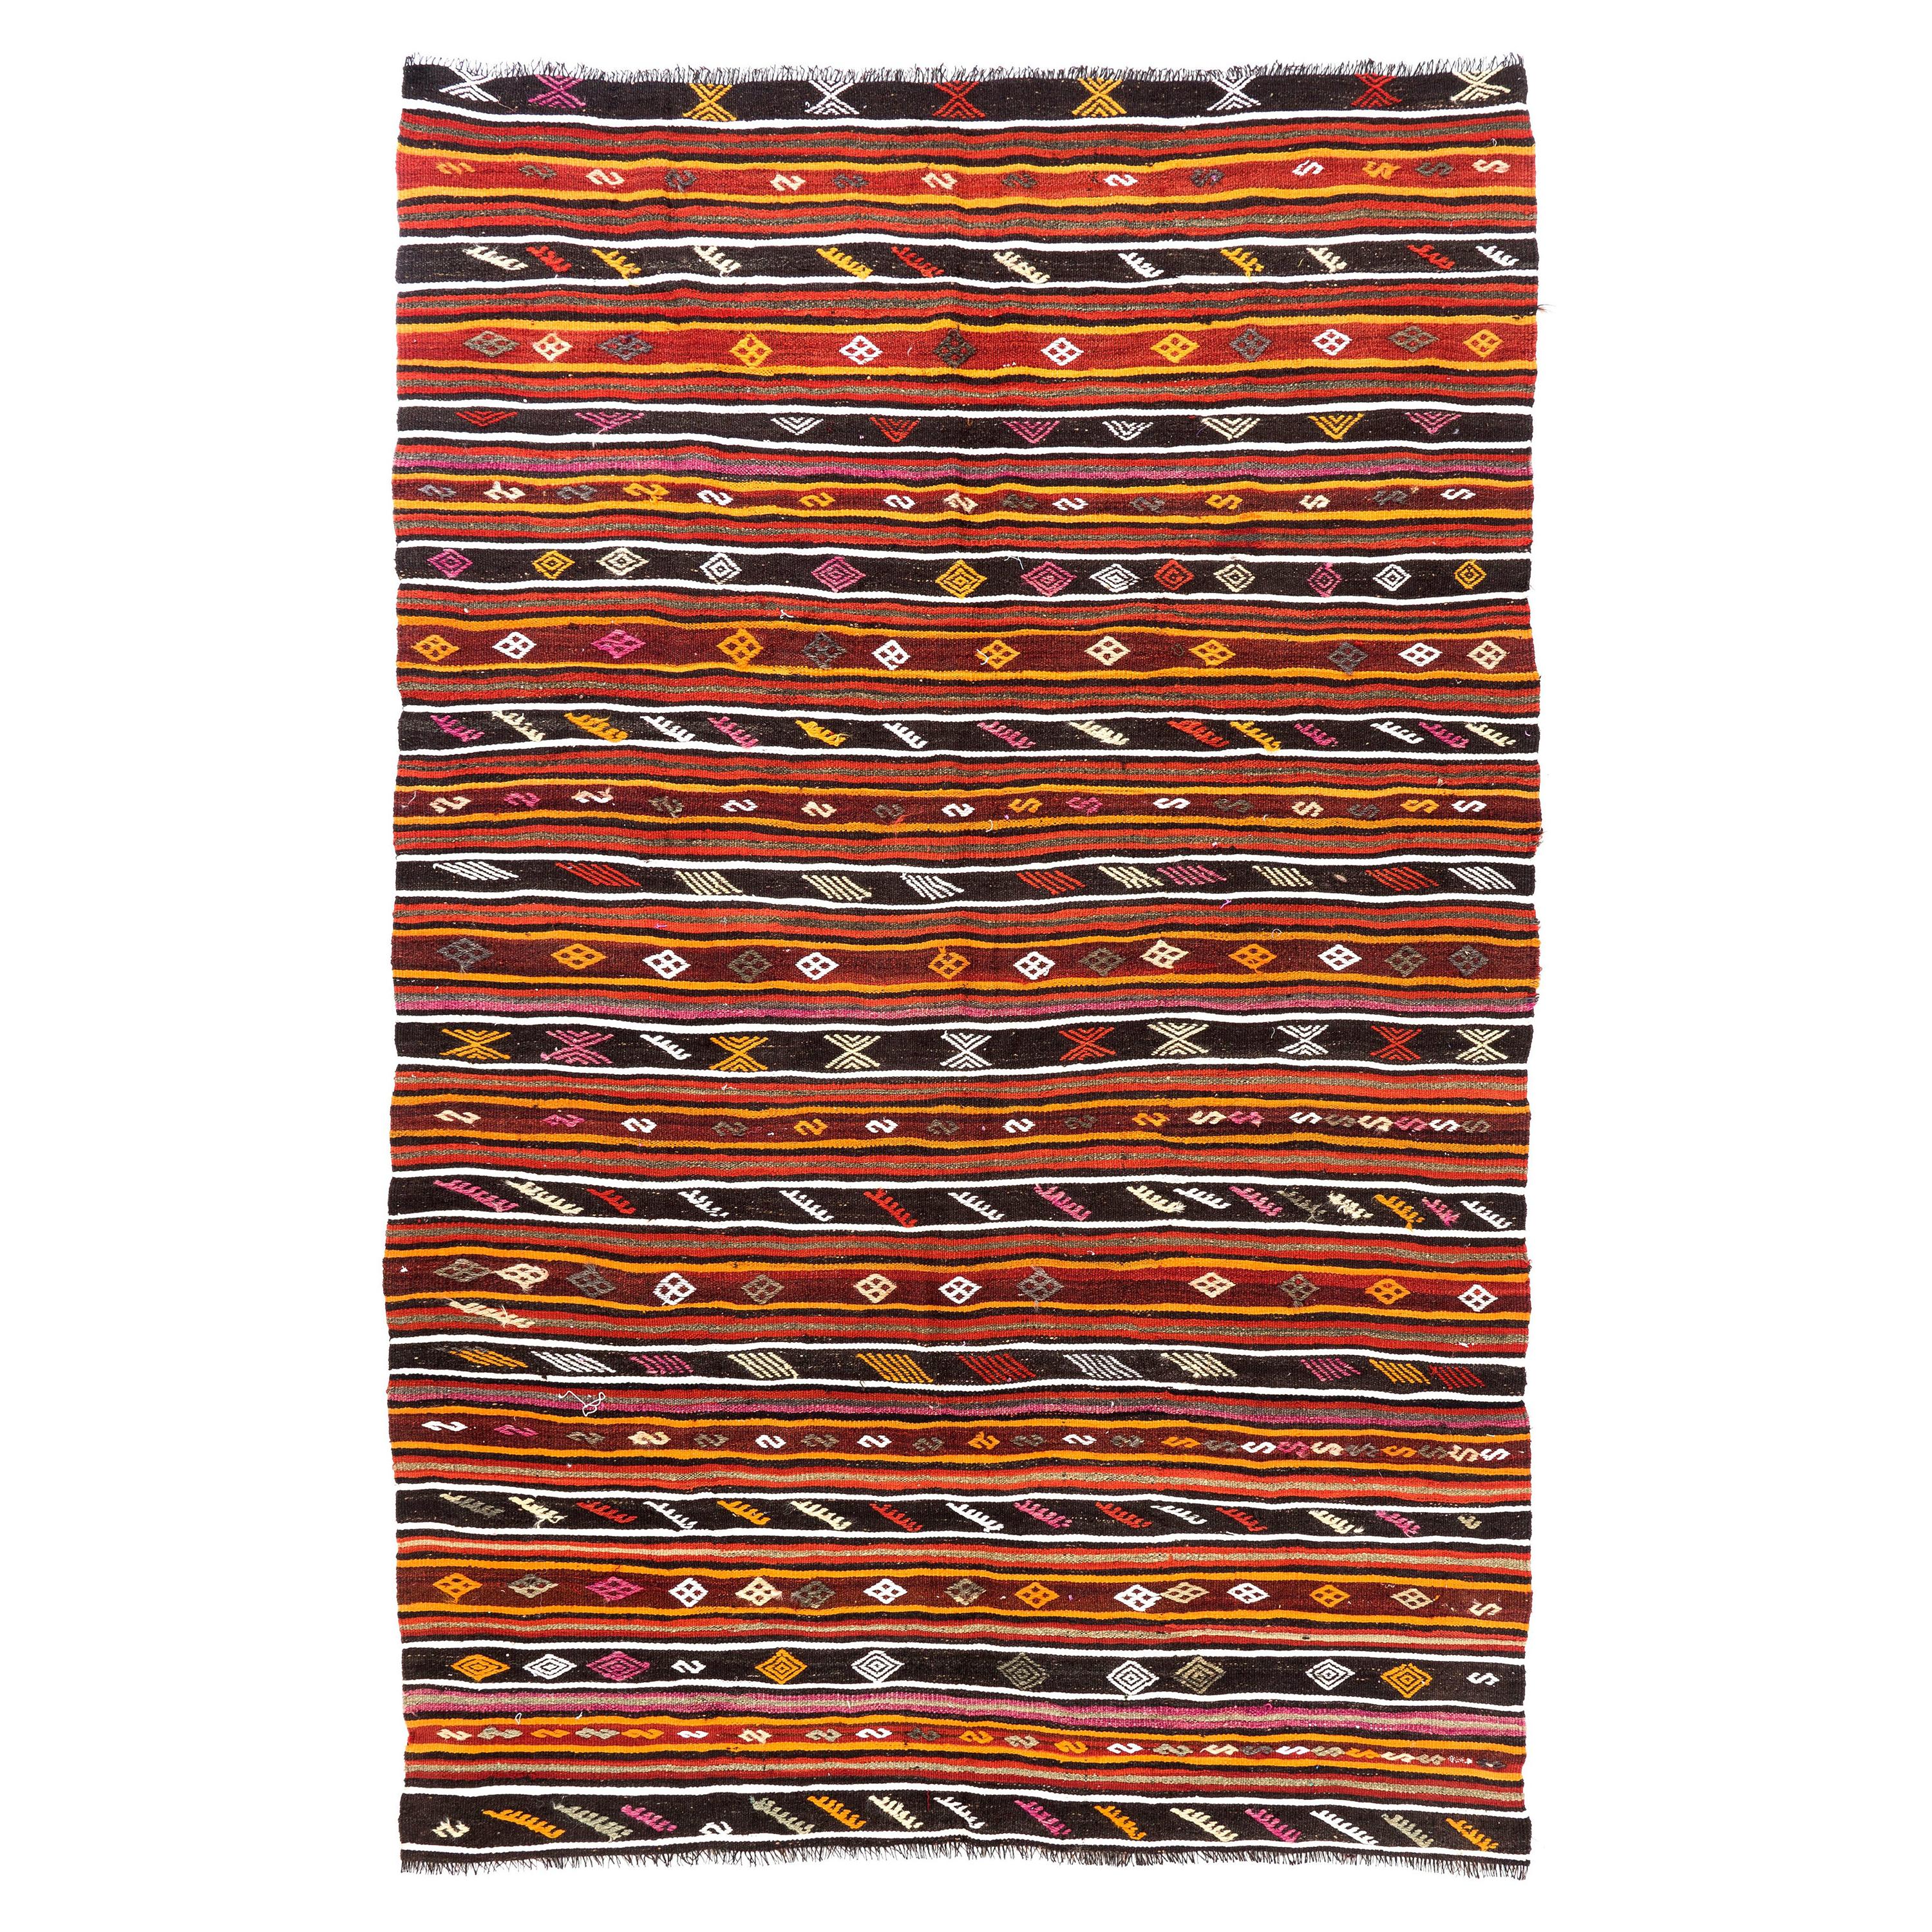 6.7x10 Ft Vintage Striped Kilim, Double Sided Flat-Weave Rug, Anatolian Carpet For Sale